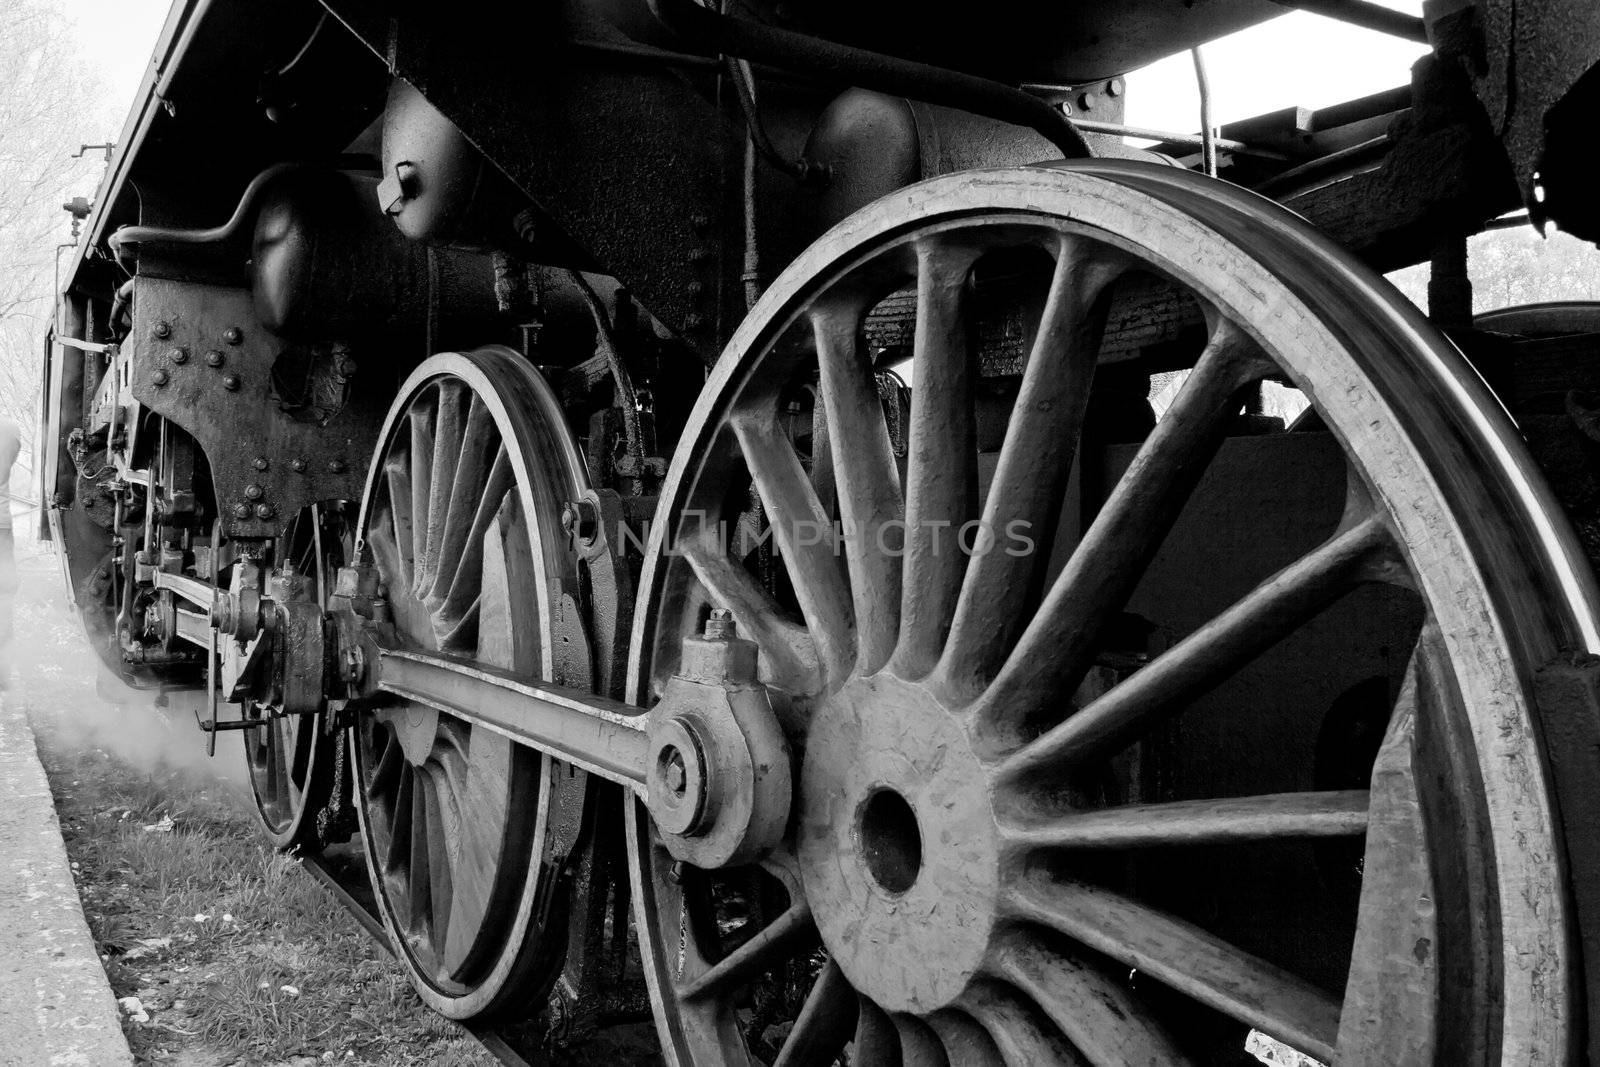 Wheels of an old steam locomotive by remik44992